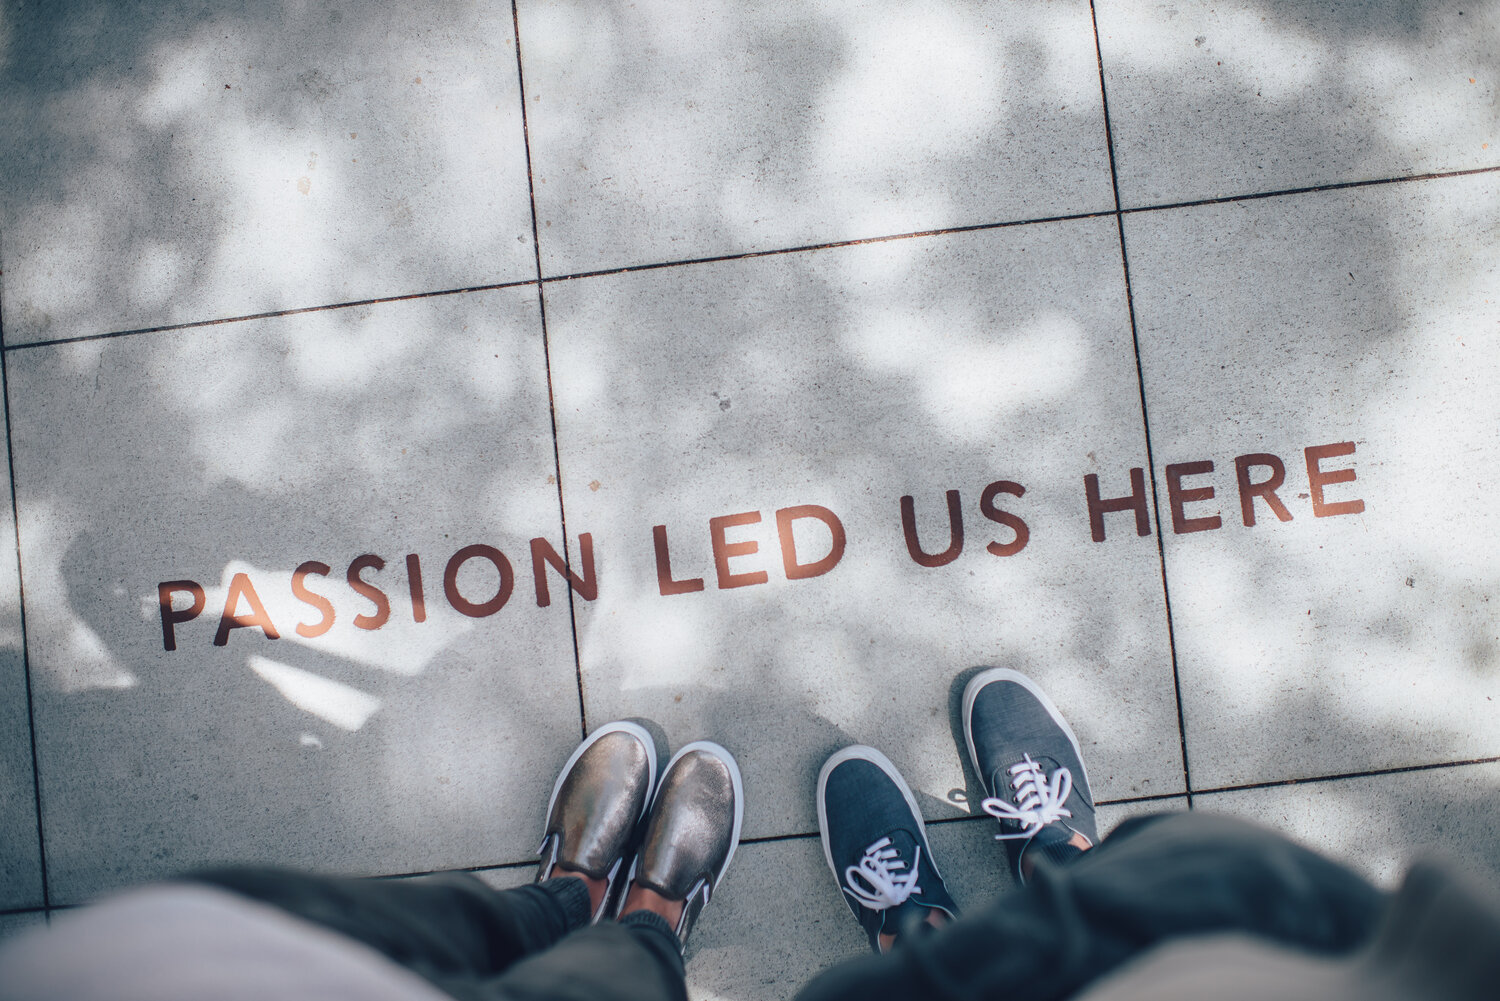 Passion led us here quote